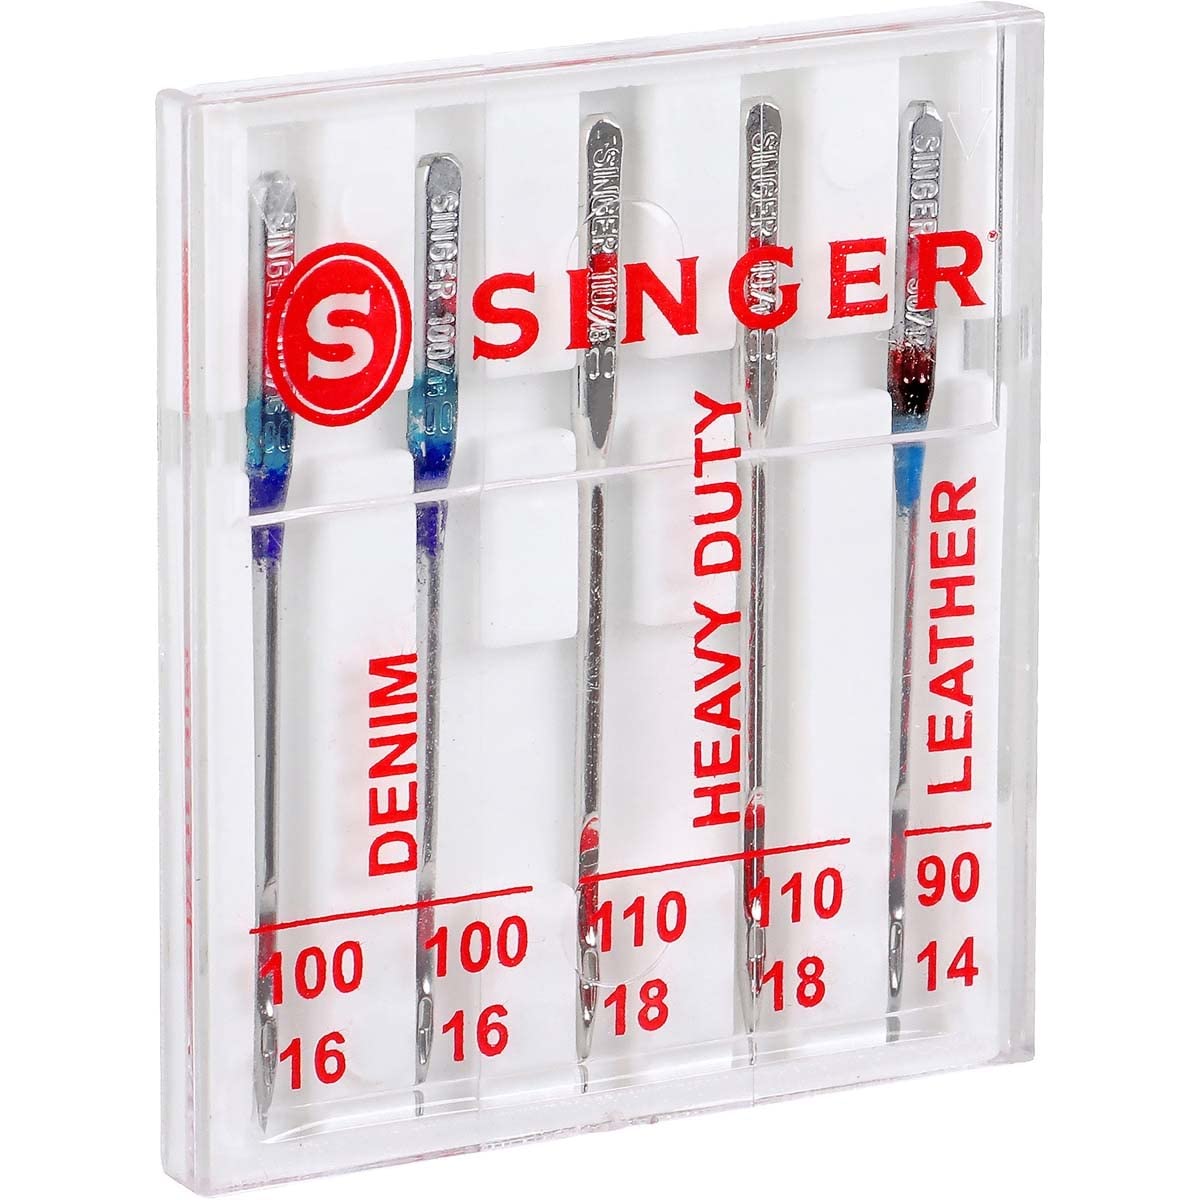 SINGER 04801 Universal Heavy Duty Sewing Machine Needles, 5-Count (Packaging May vary)